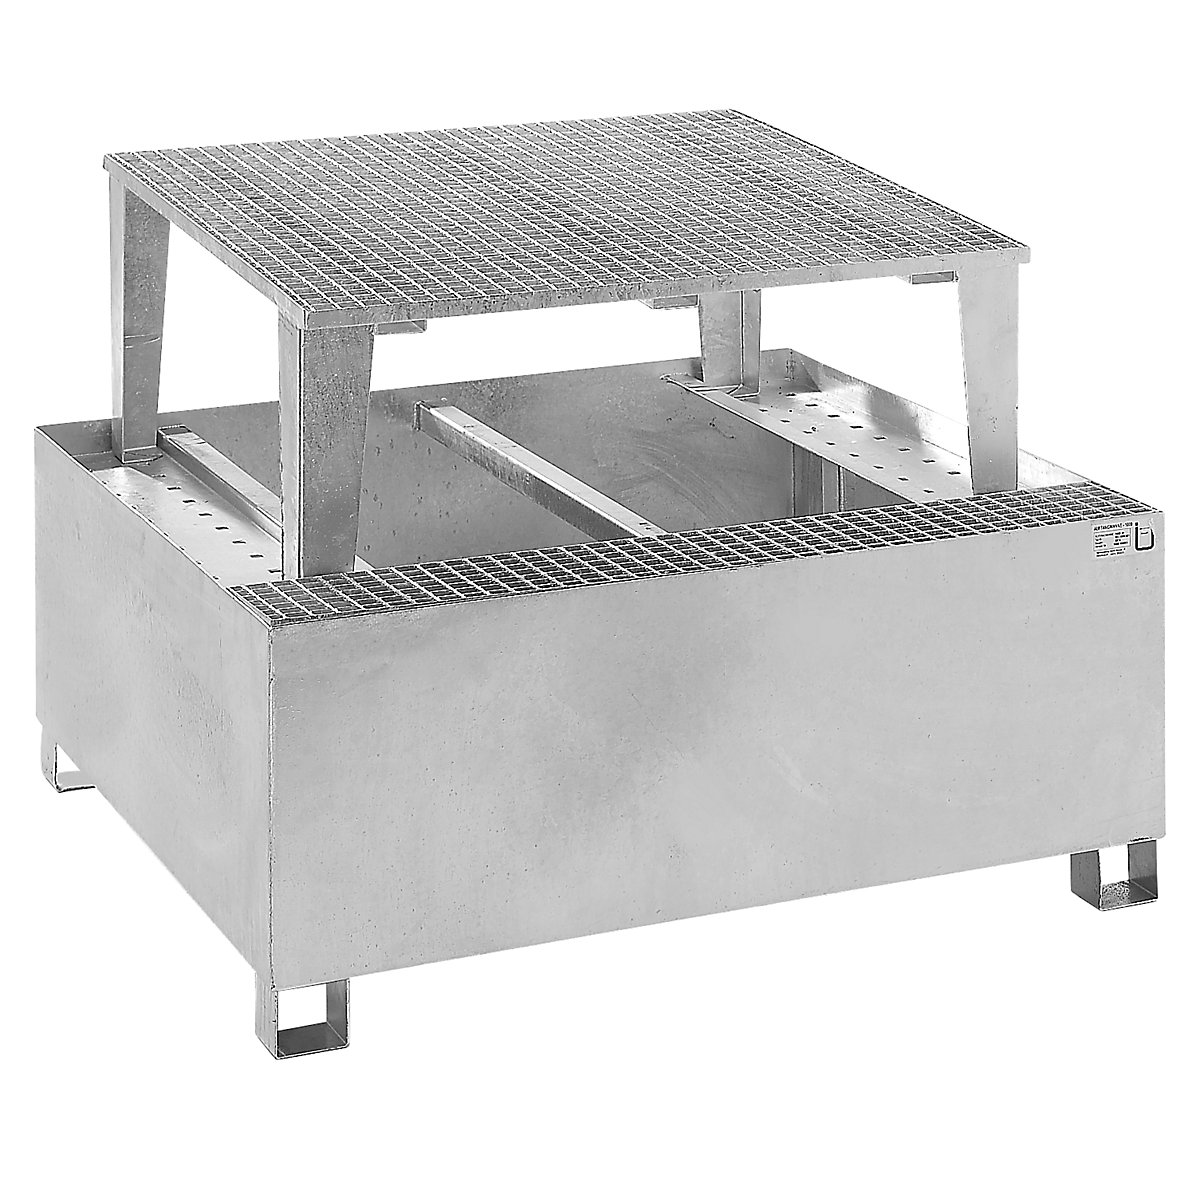 Steel sump tray for IBC/CTC tank containers – eurokraft basic, for 1 x 1000 l container, hot dip galvanised-3